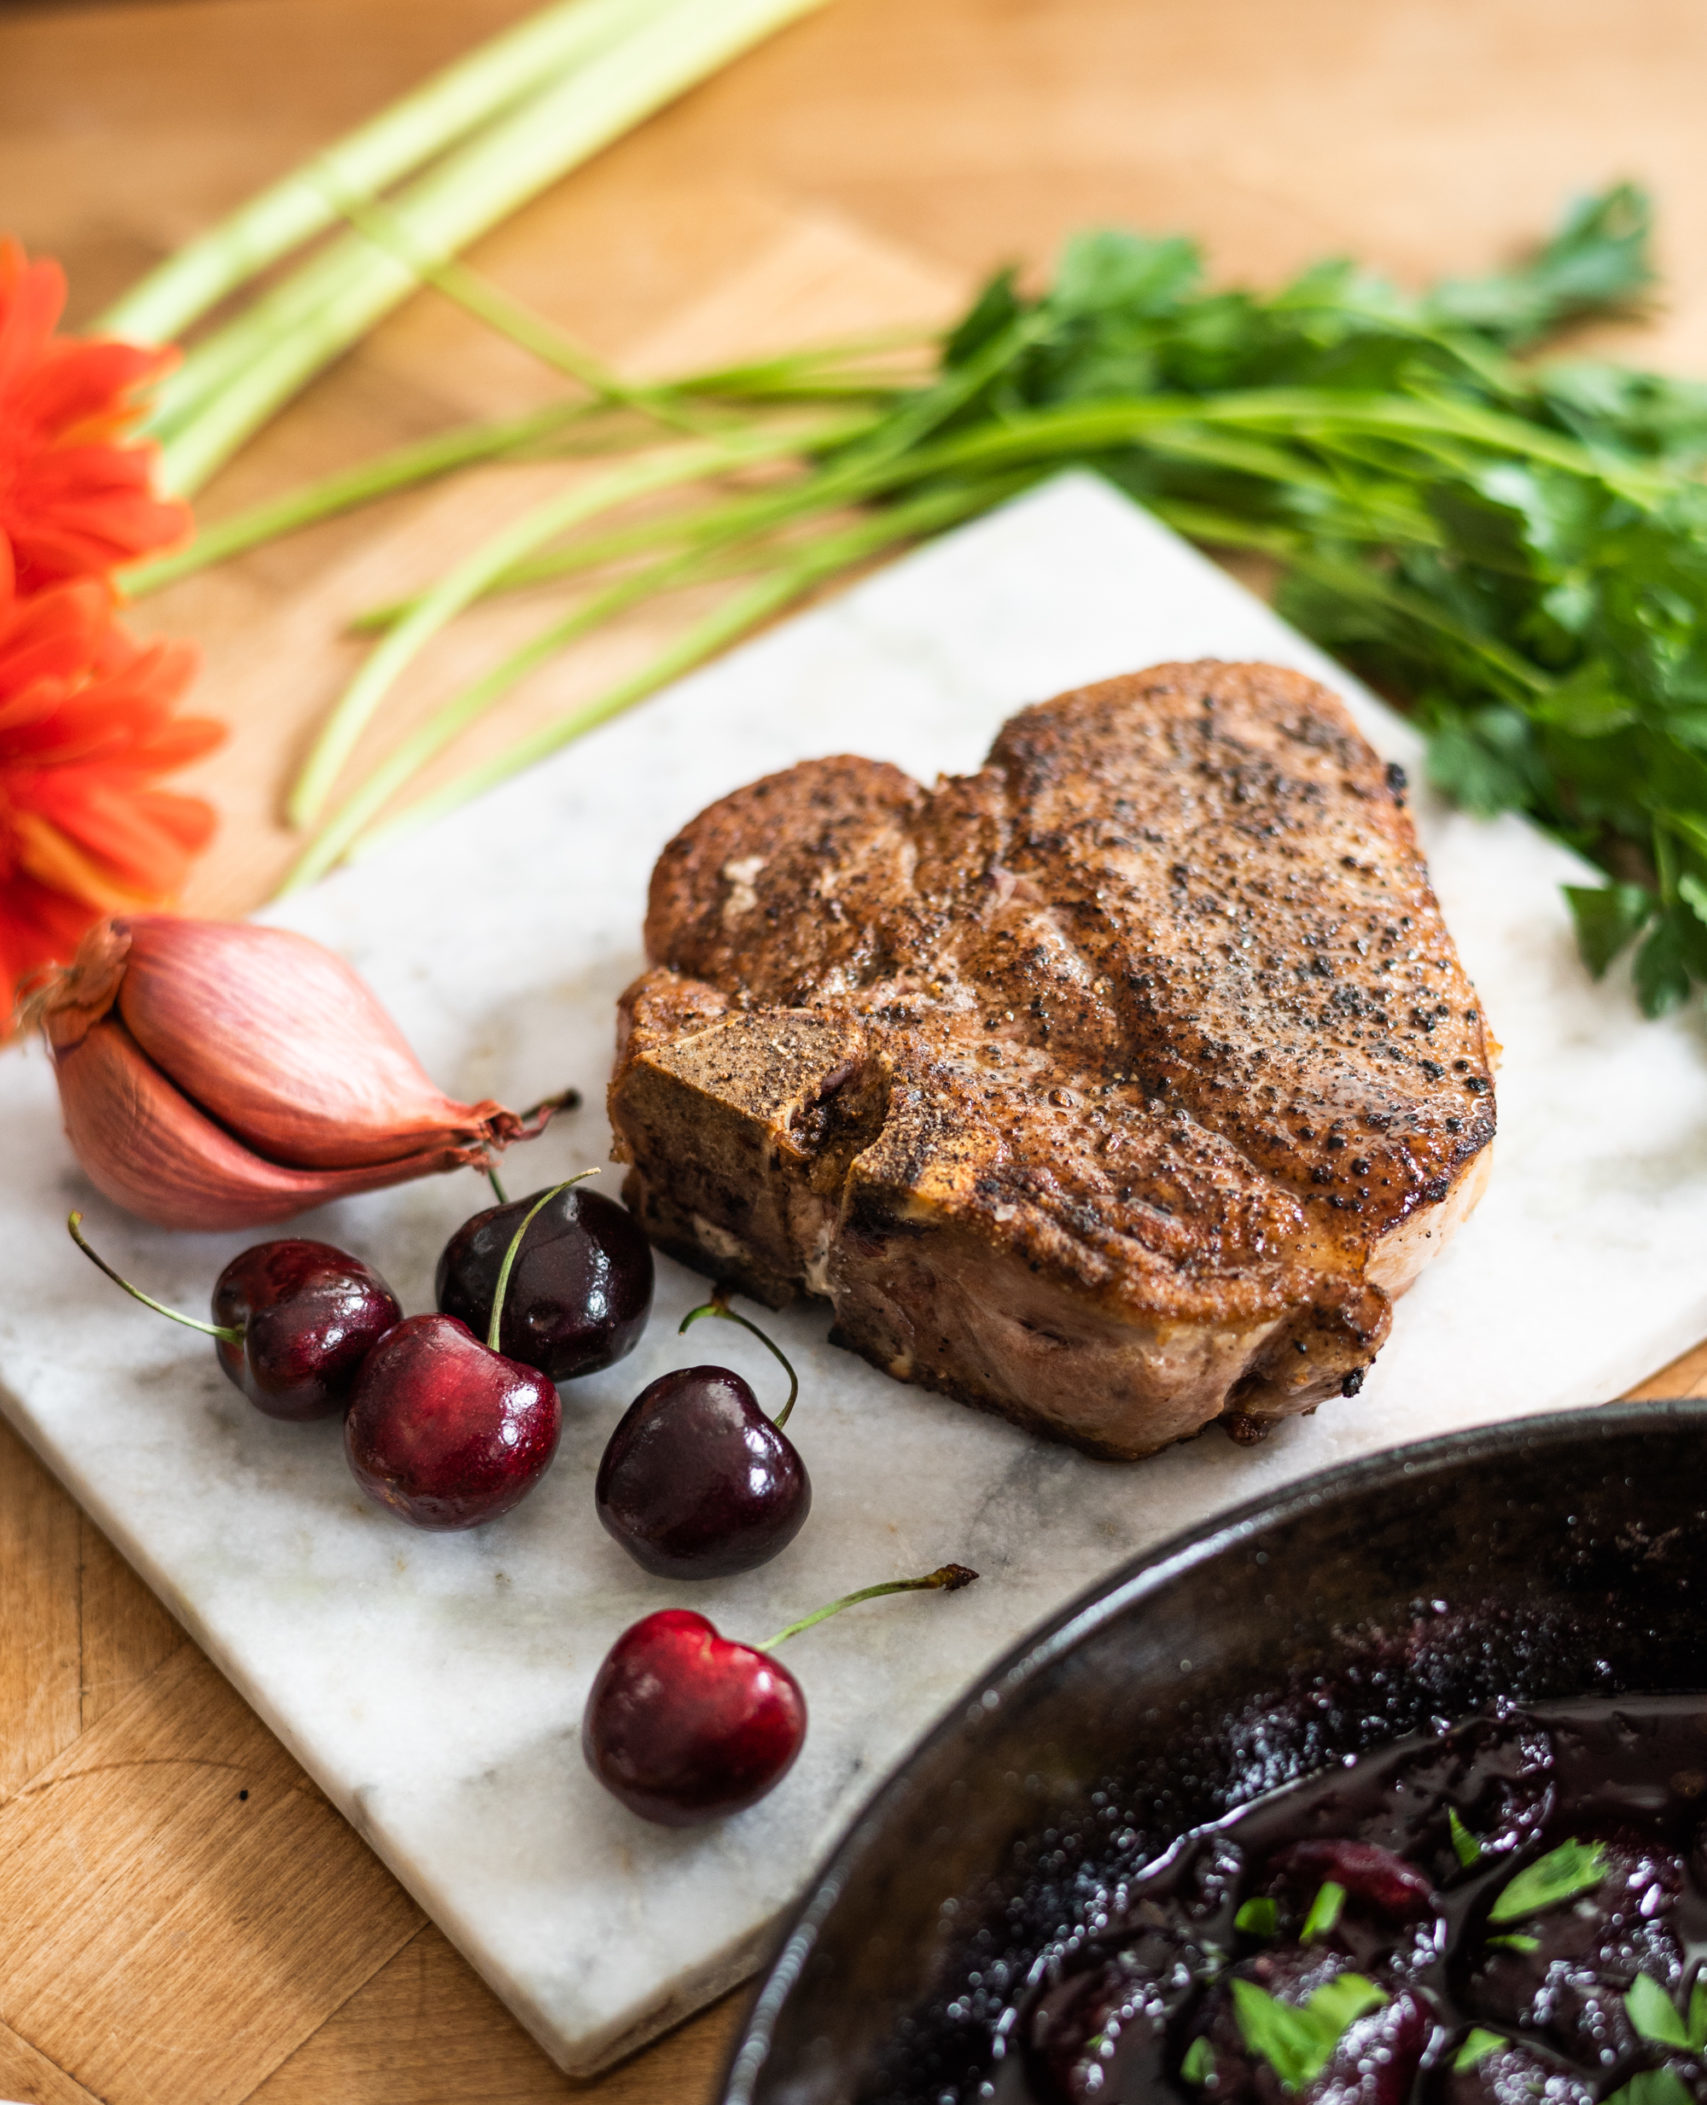 Grilled Pork Chop and Cherry Sauce